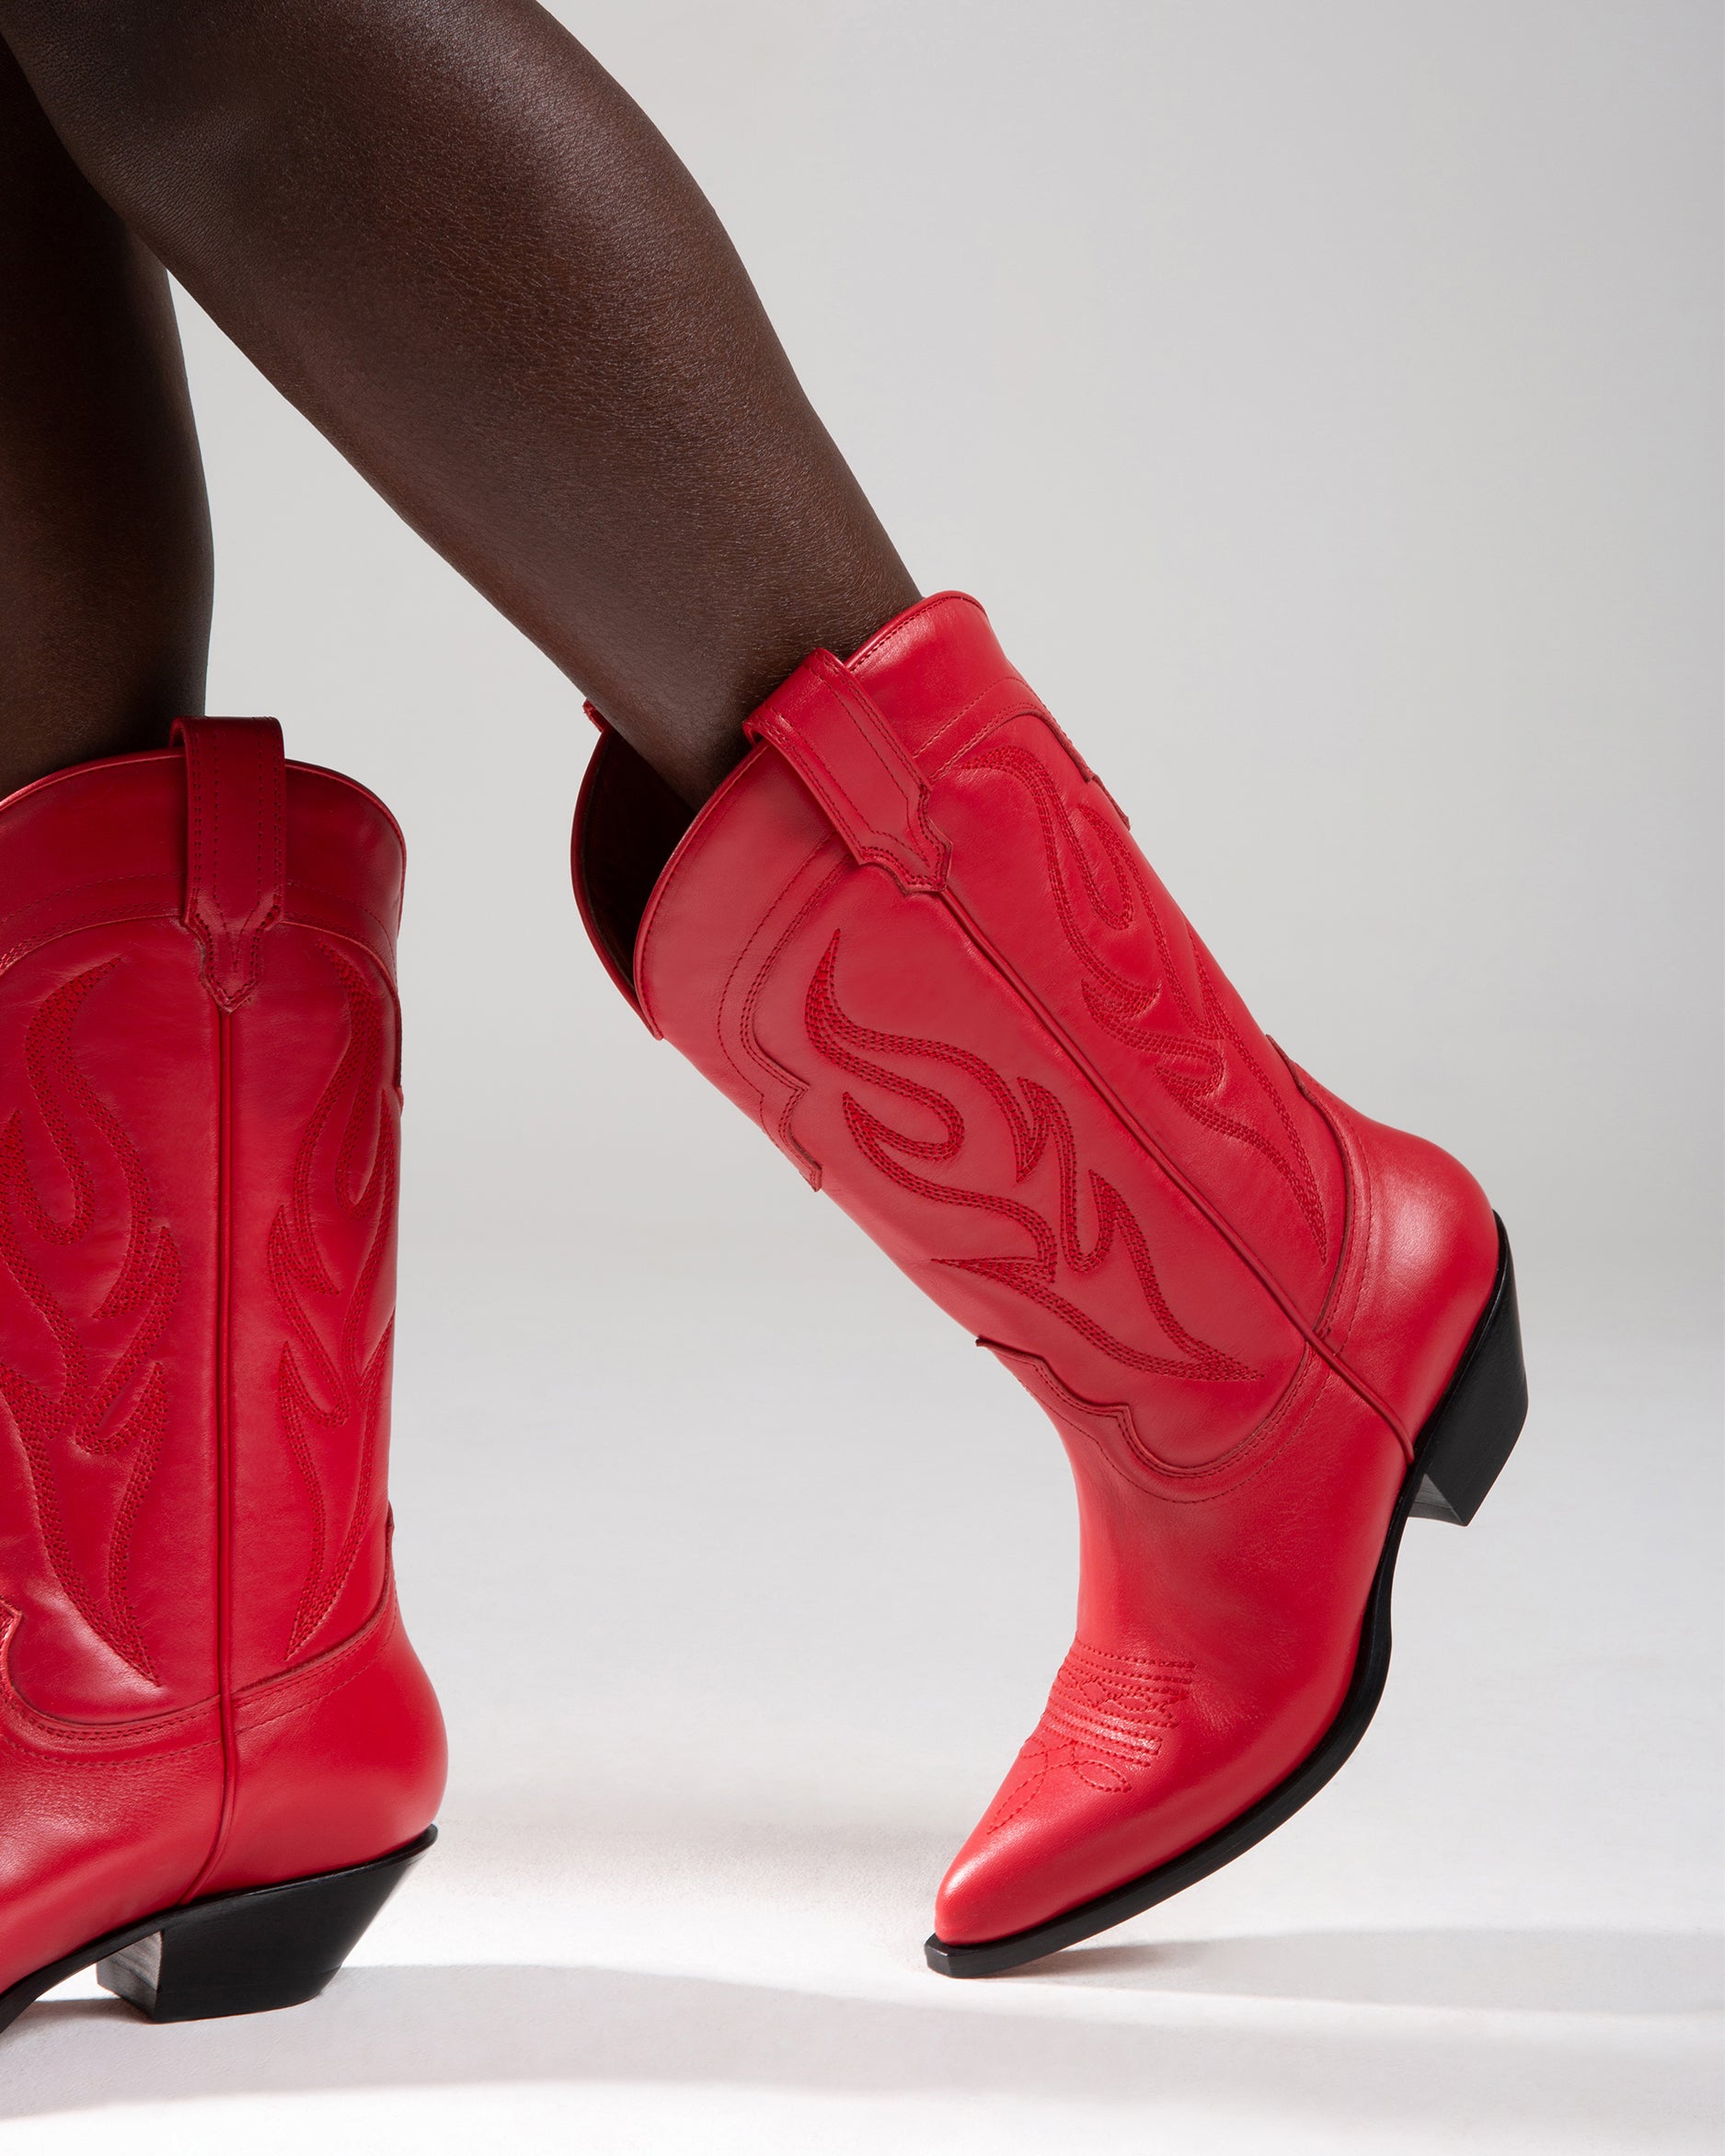 SANTA FE Women's Cowboy in Red Calfskin On tone embroidery – Sonora Boots